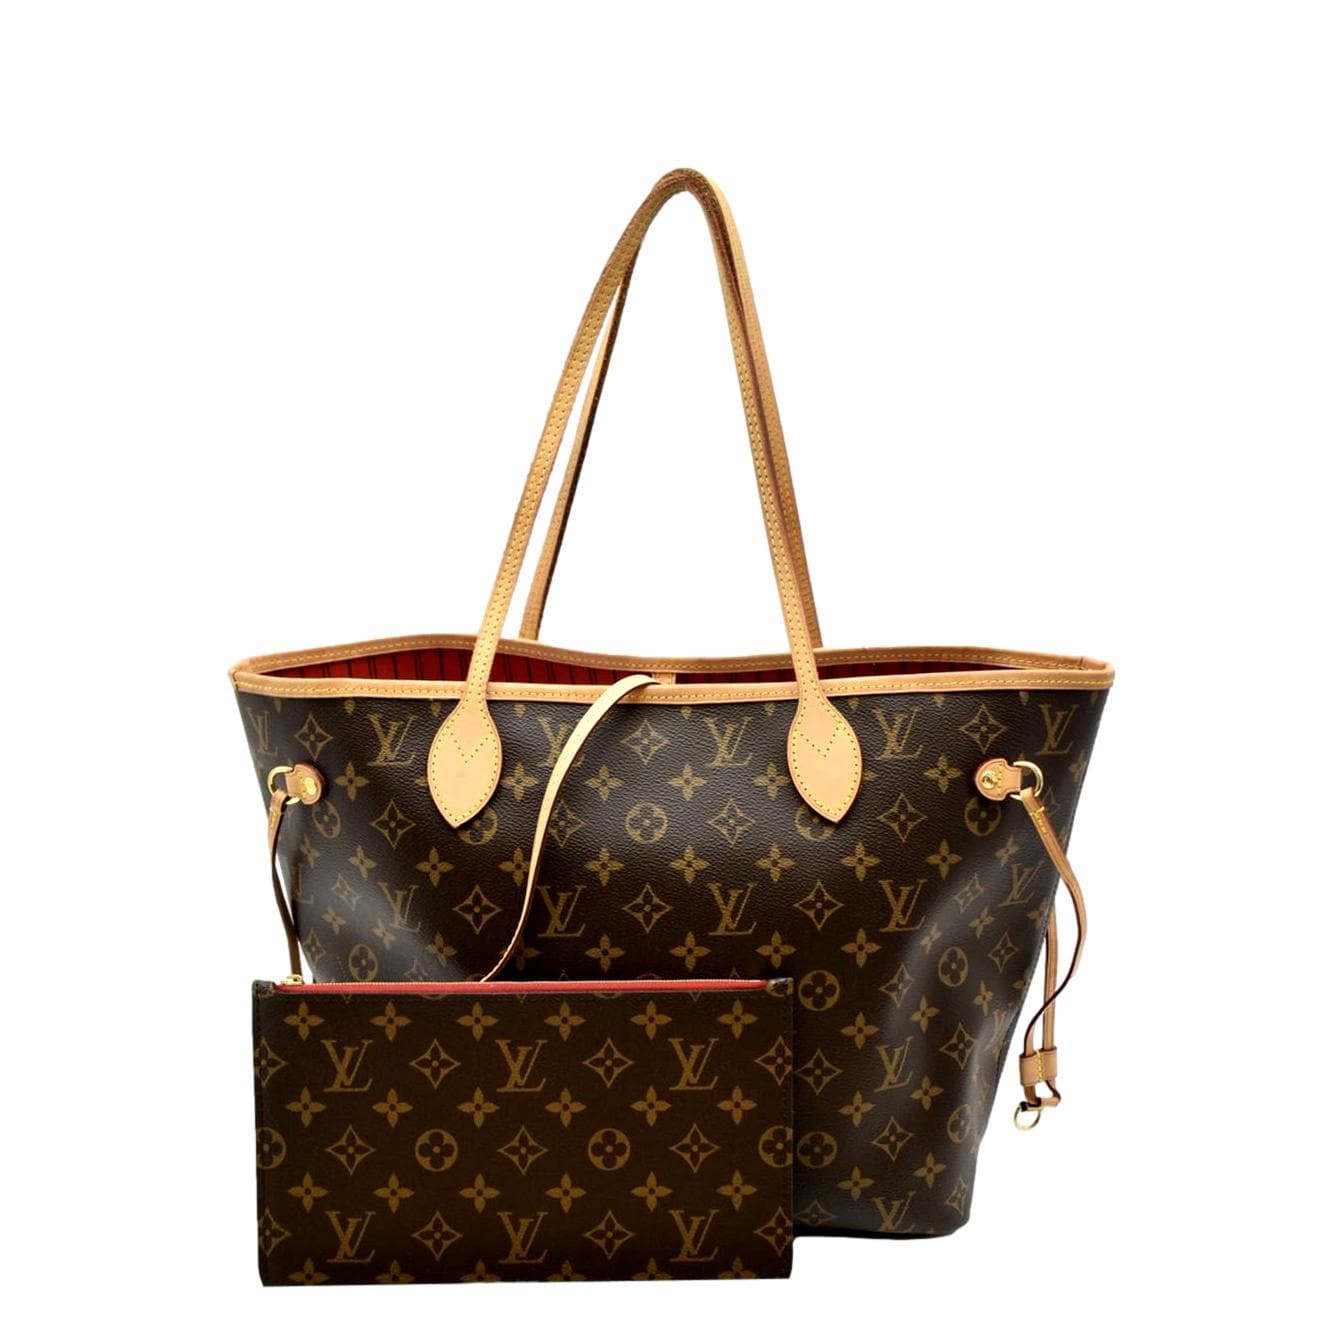 Louis Vuitton Lv neverfull bag monogram with red interior  Louis vuitton  handbags neverfull, Louis vuitton handbags crossbody, Louis vuitton